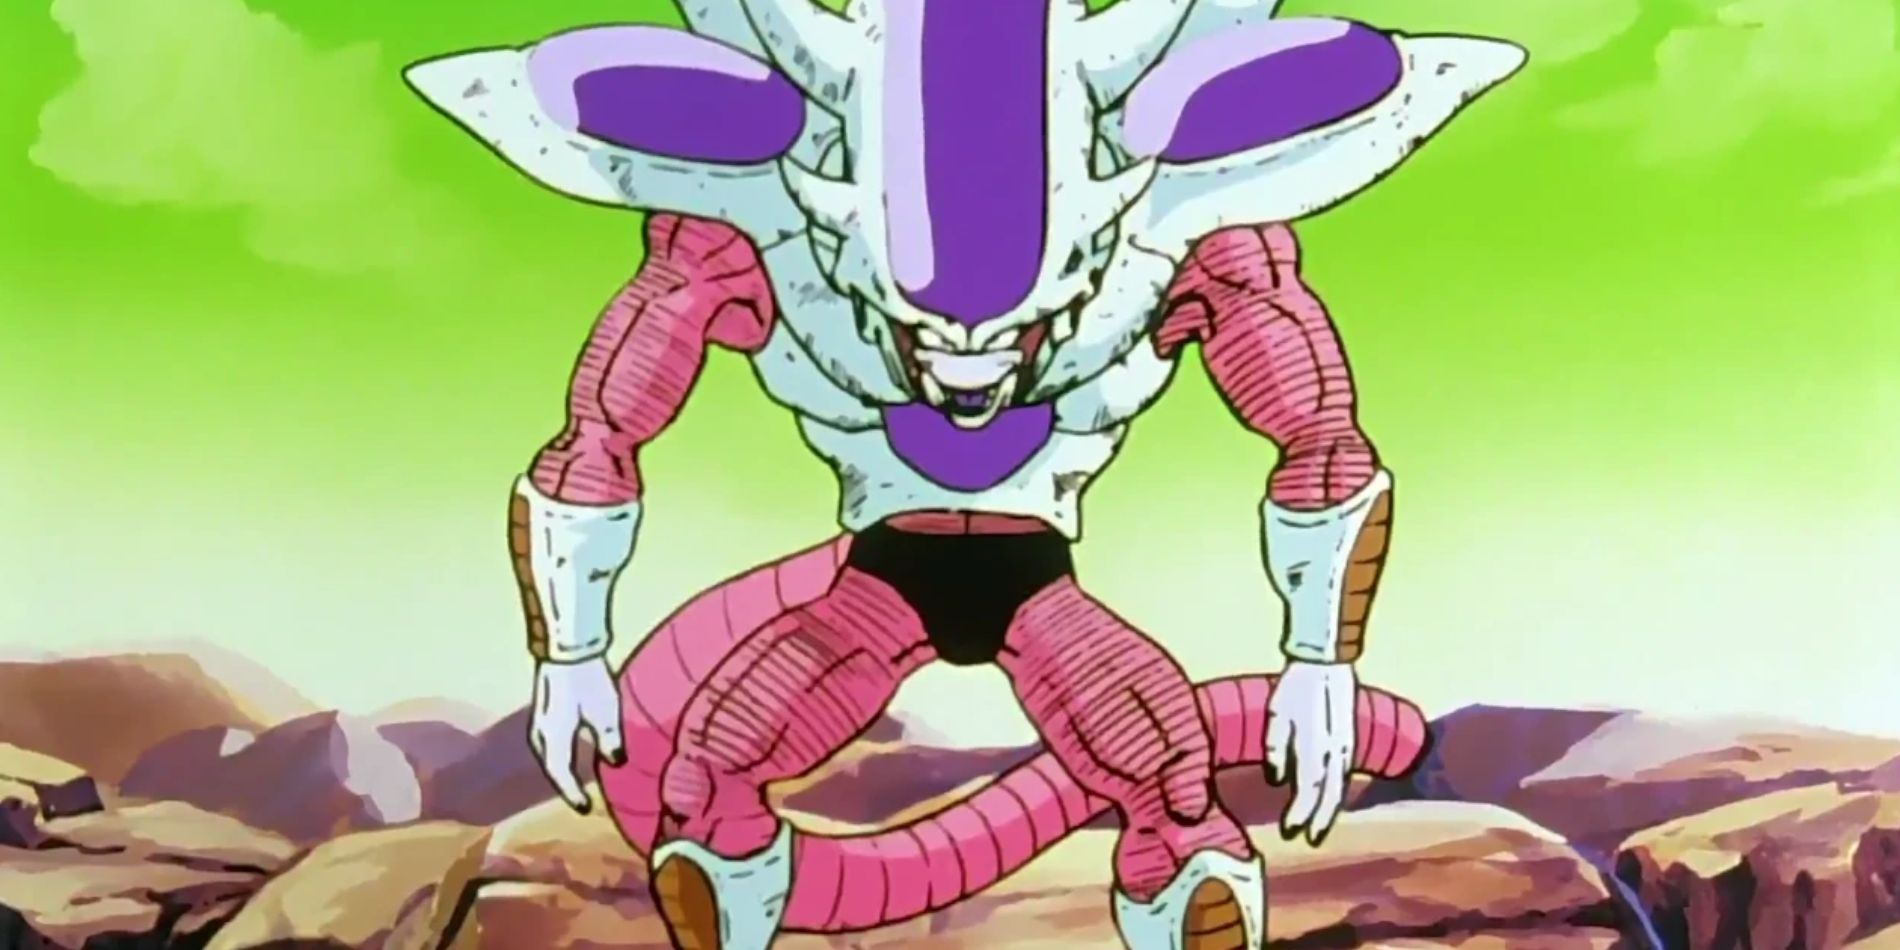 Frieza in his 3rd Form